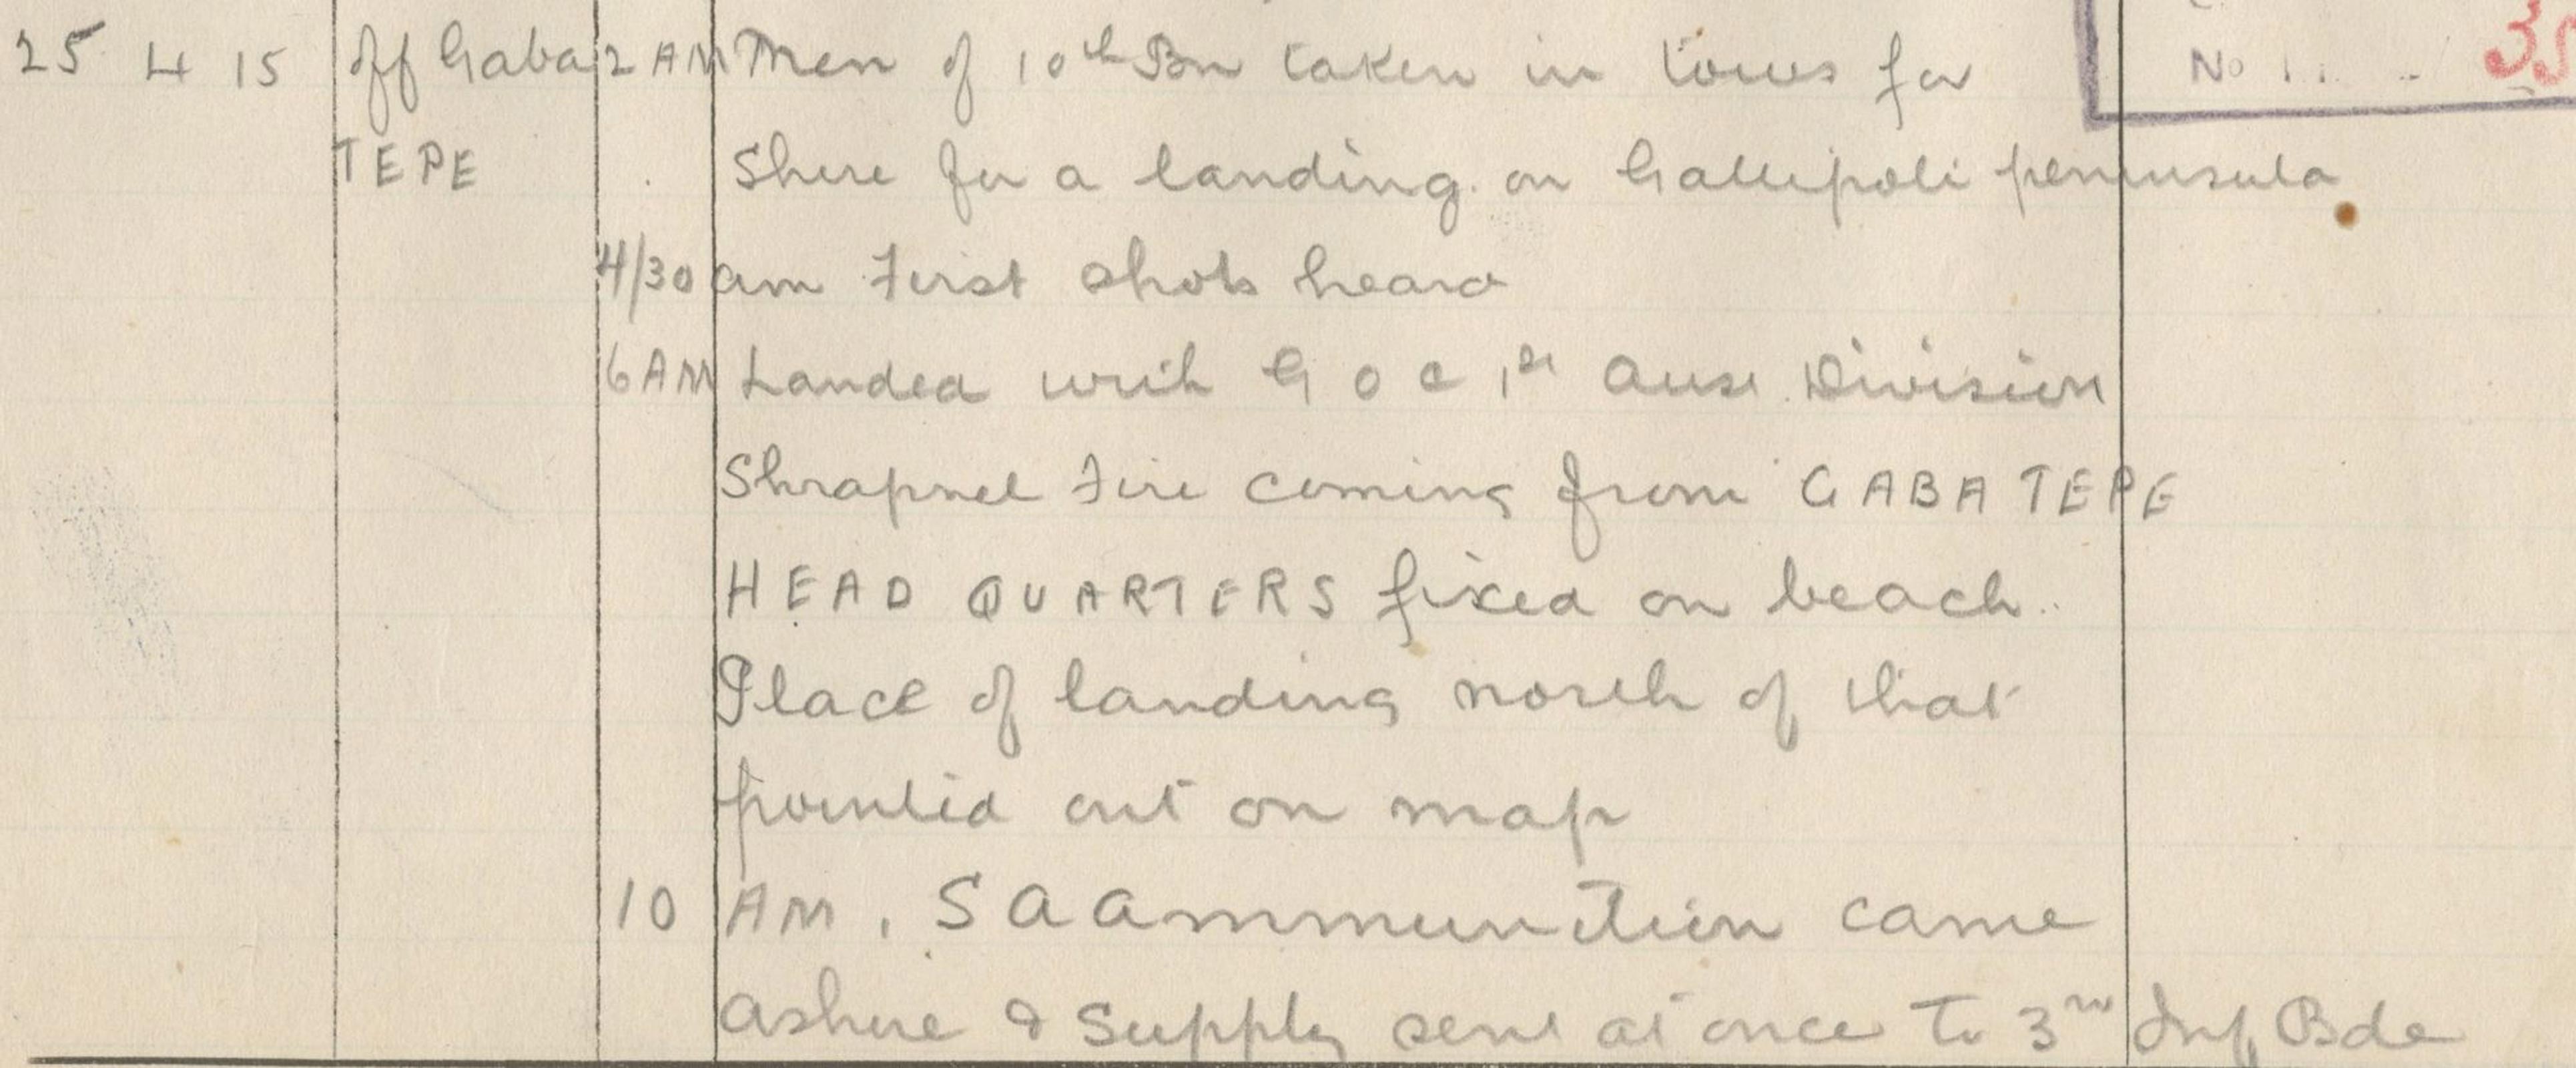 Extract from war a diary created by the Australian Imperial Force during the First World War